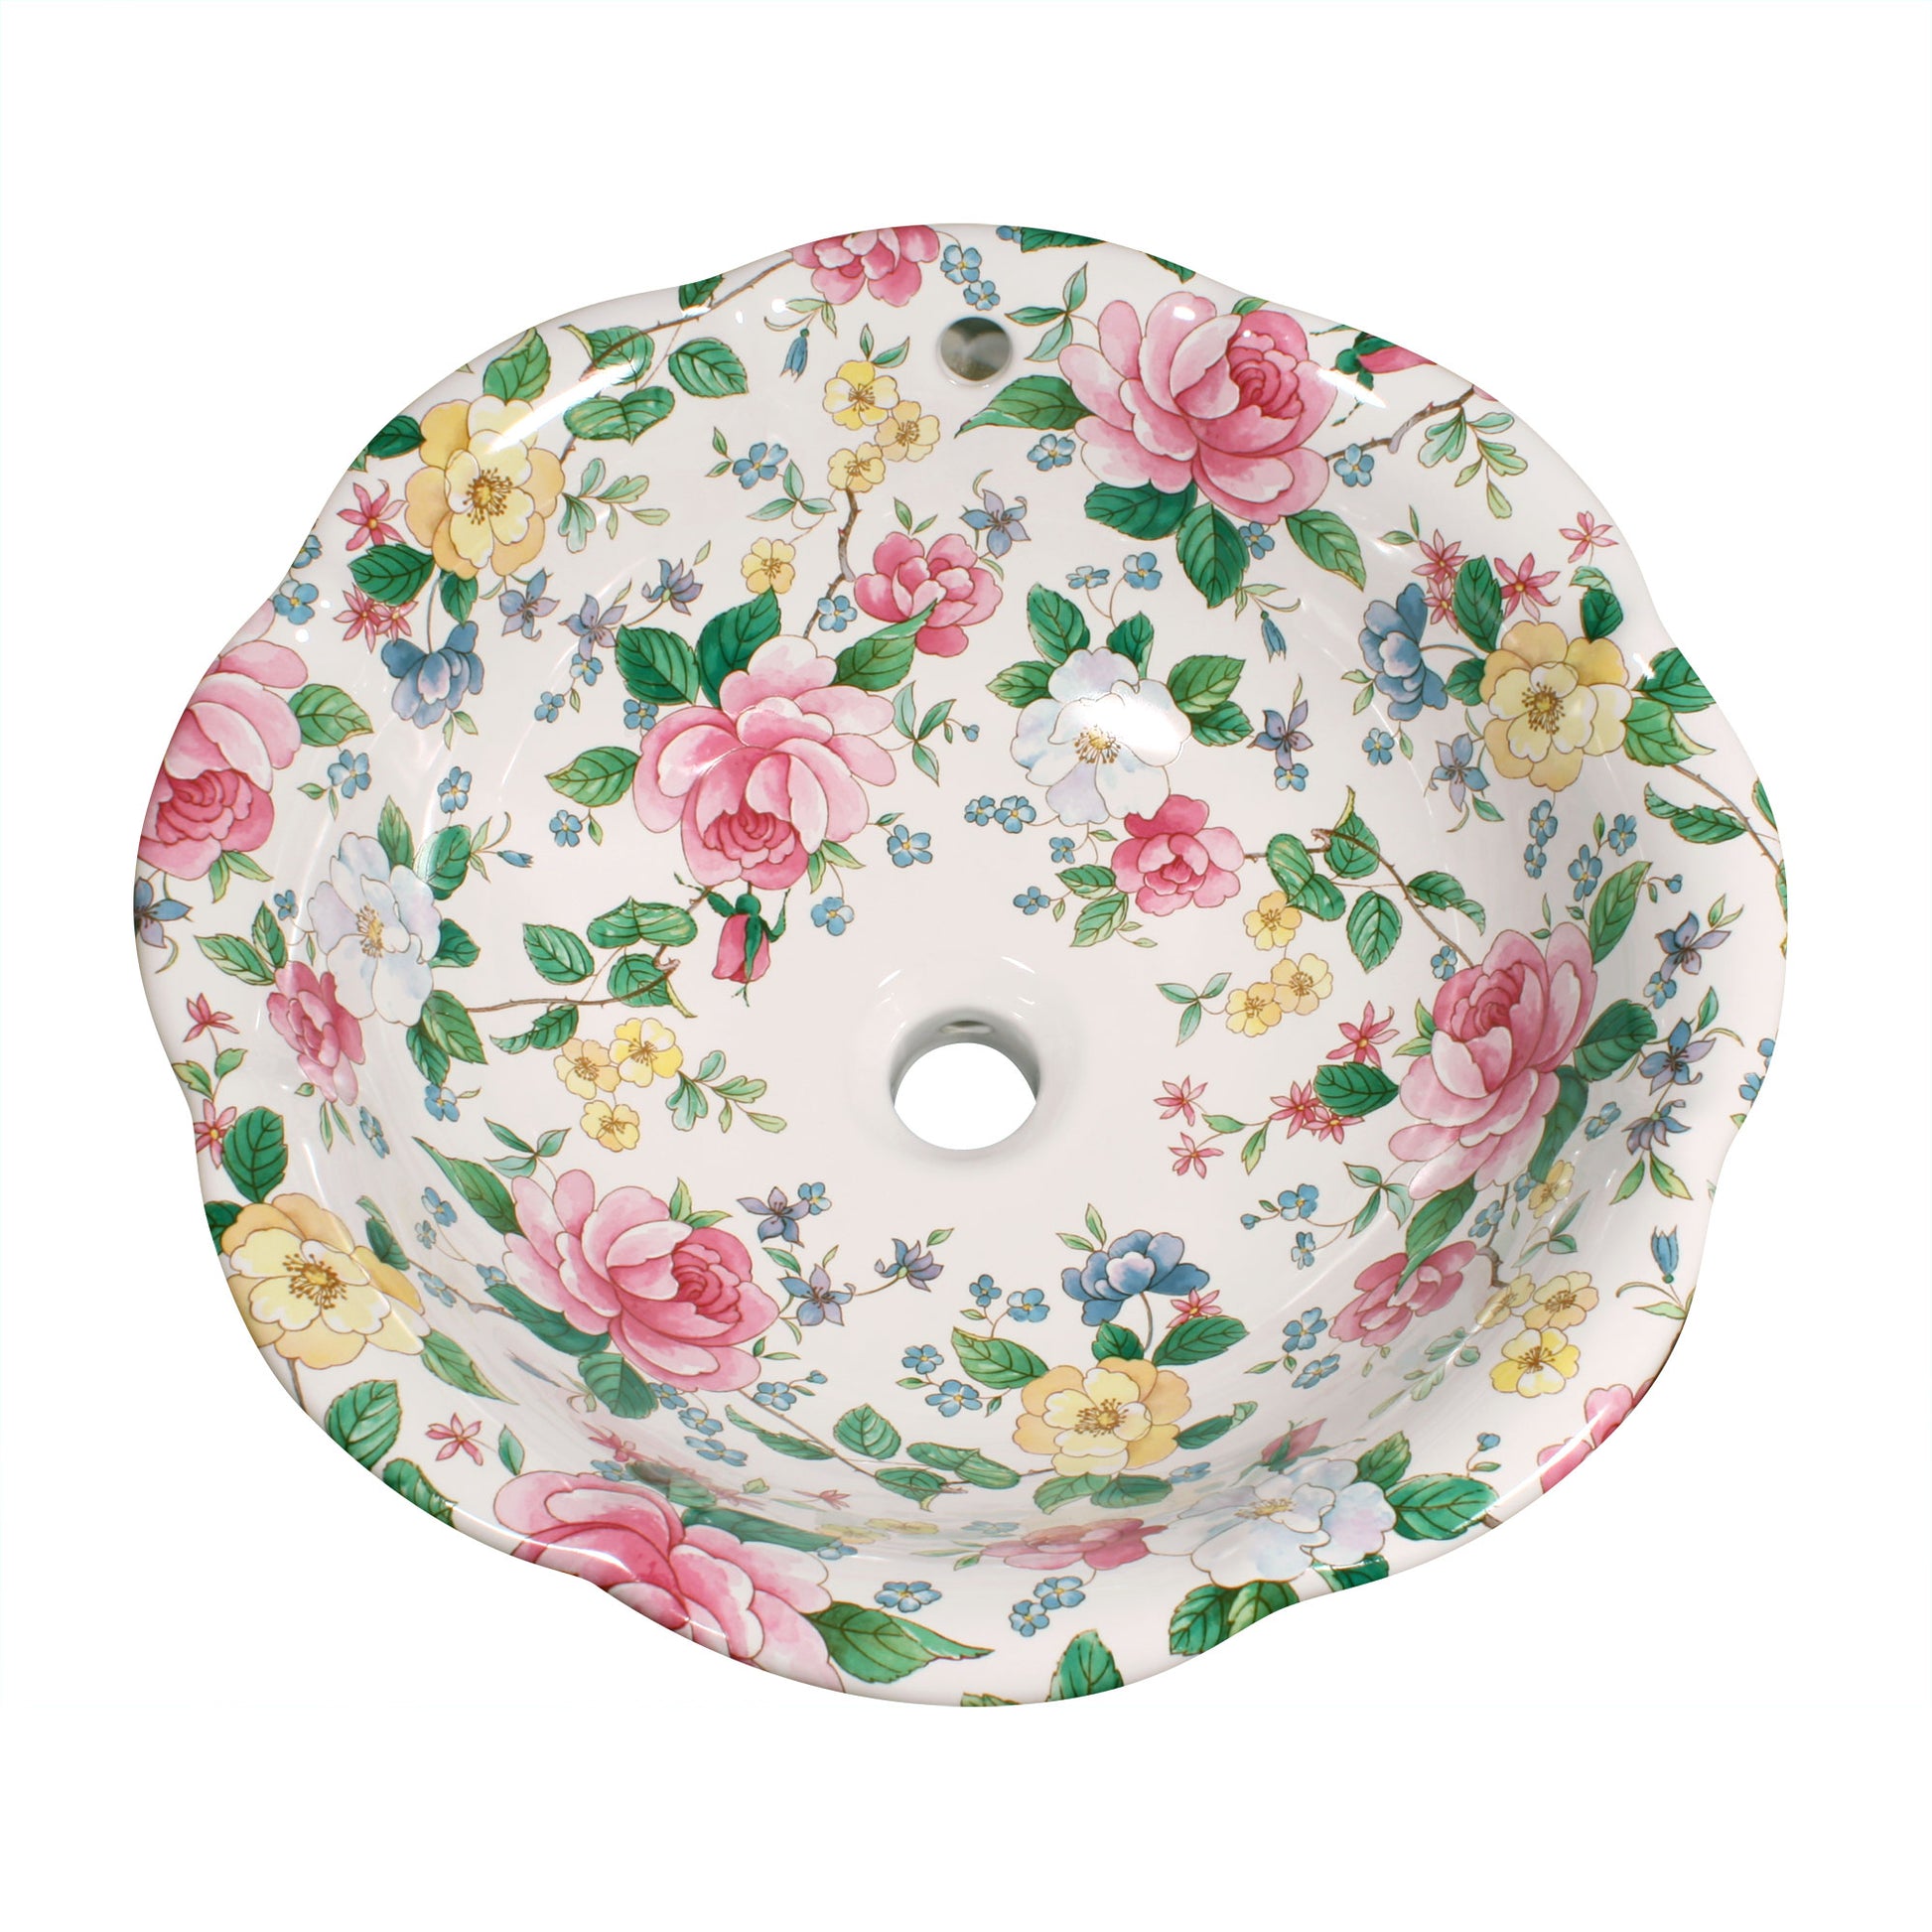 Decorative porcelain vessel sink painted with a design of pink, white and yellow chintz roses. Great for a Victorian or antique style powder room.